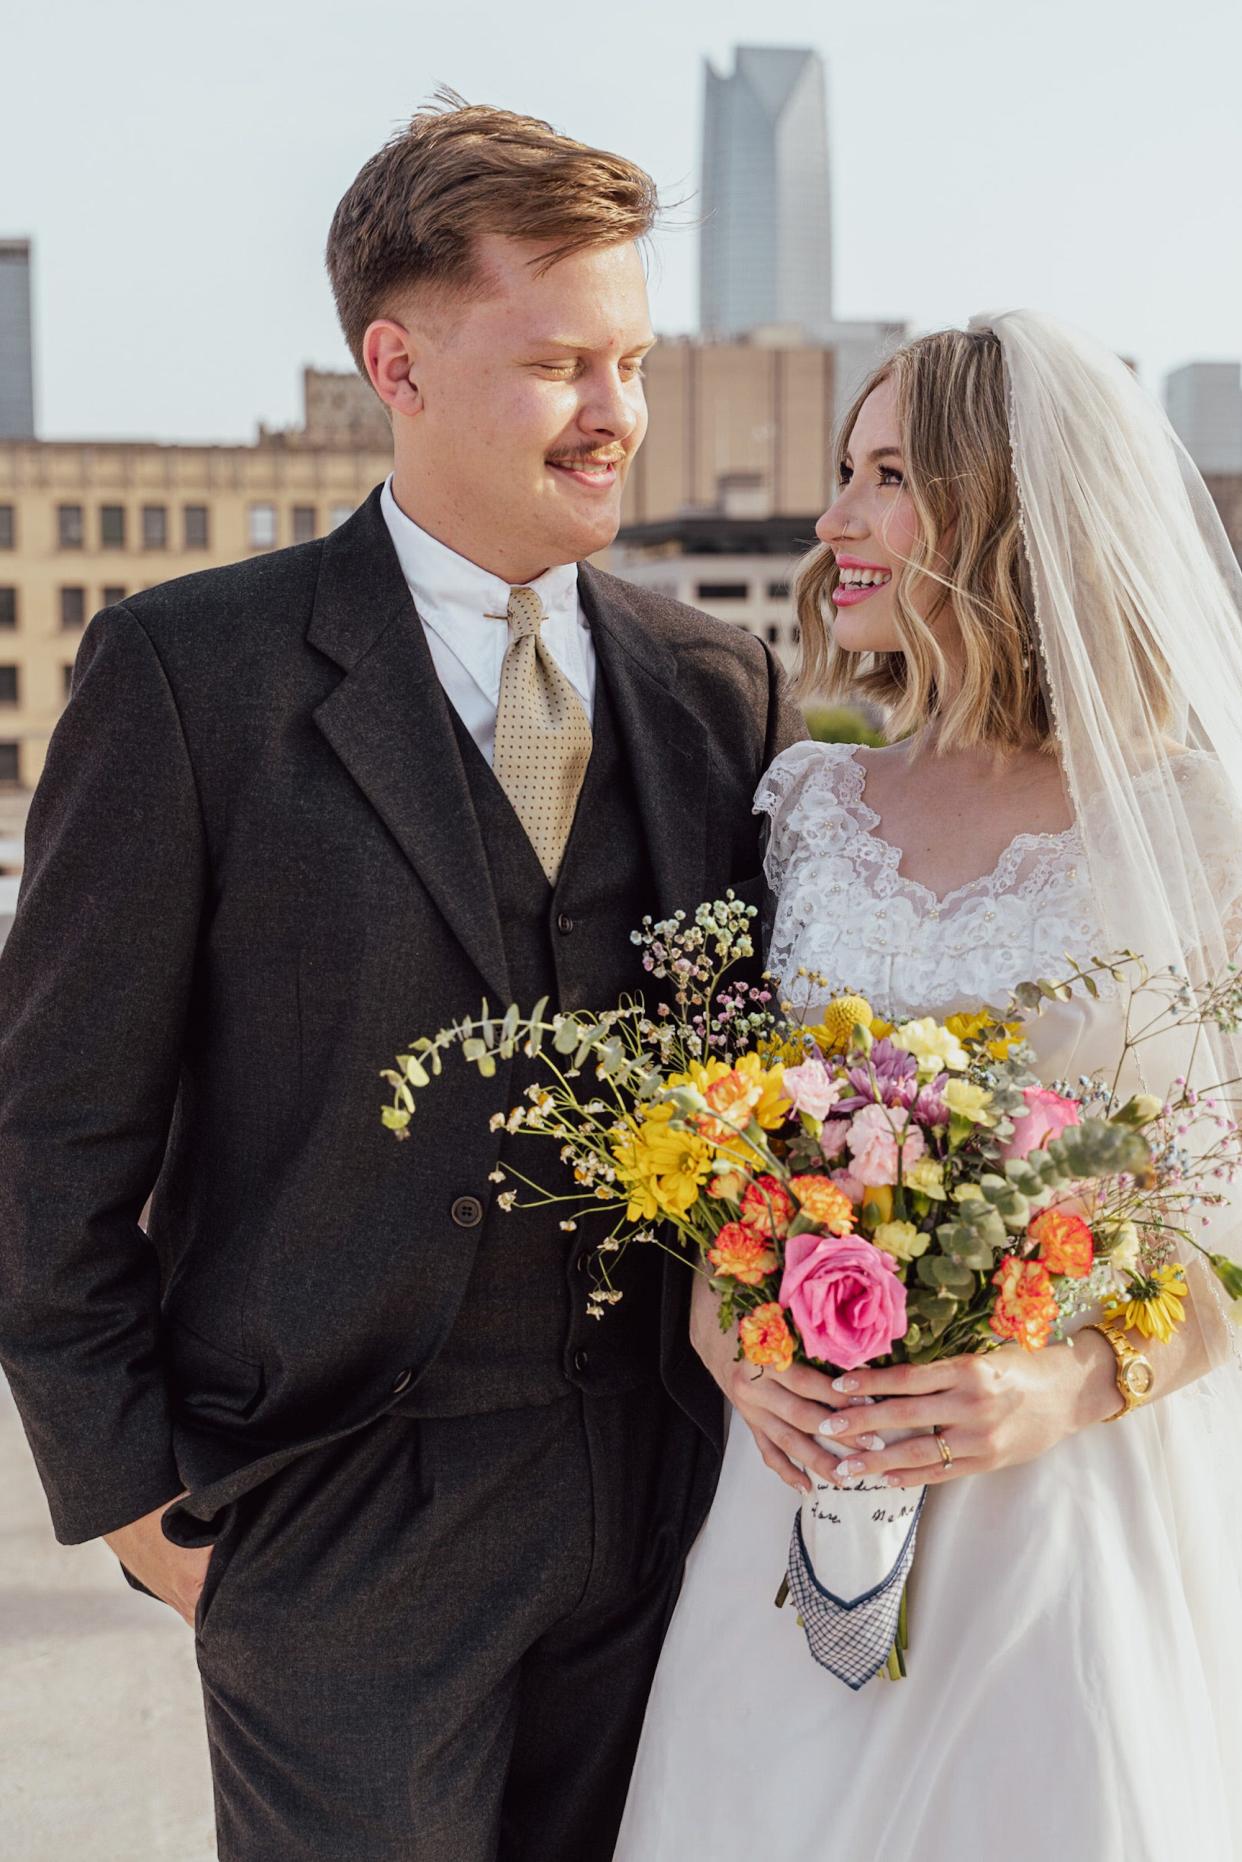 A bride and groom smile at each other on a rooftop on their wedding day.